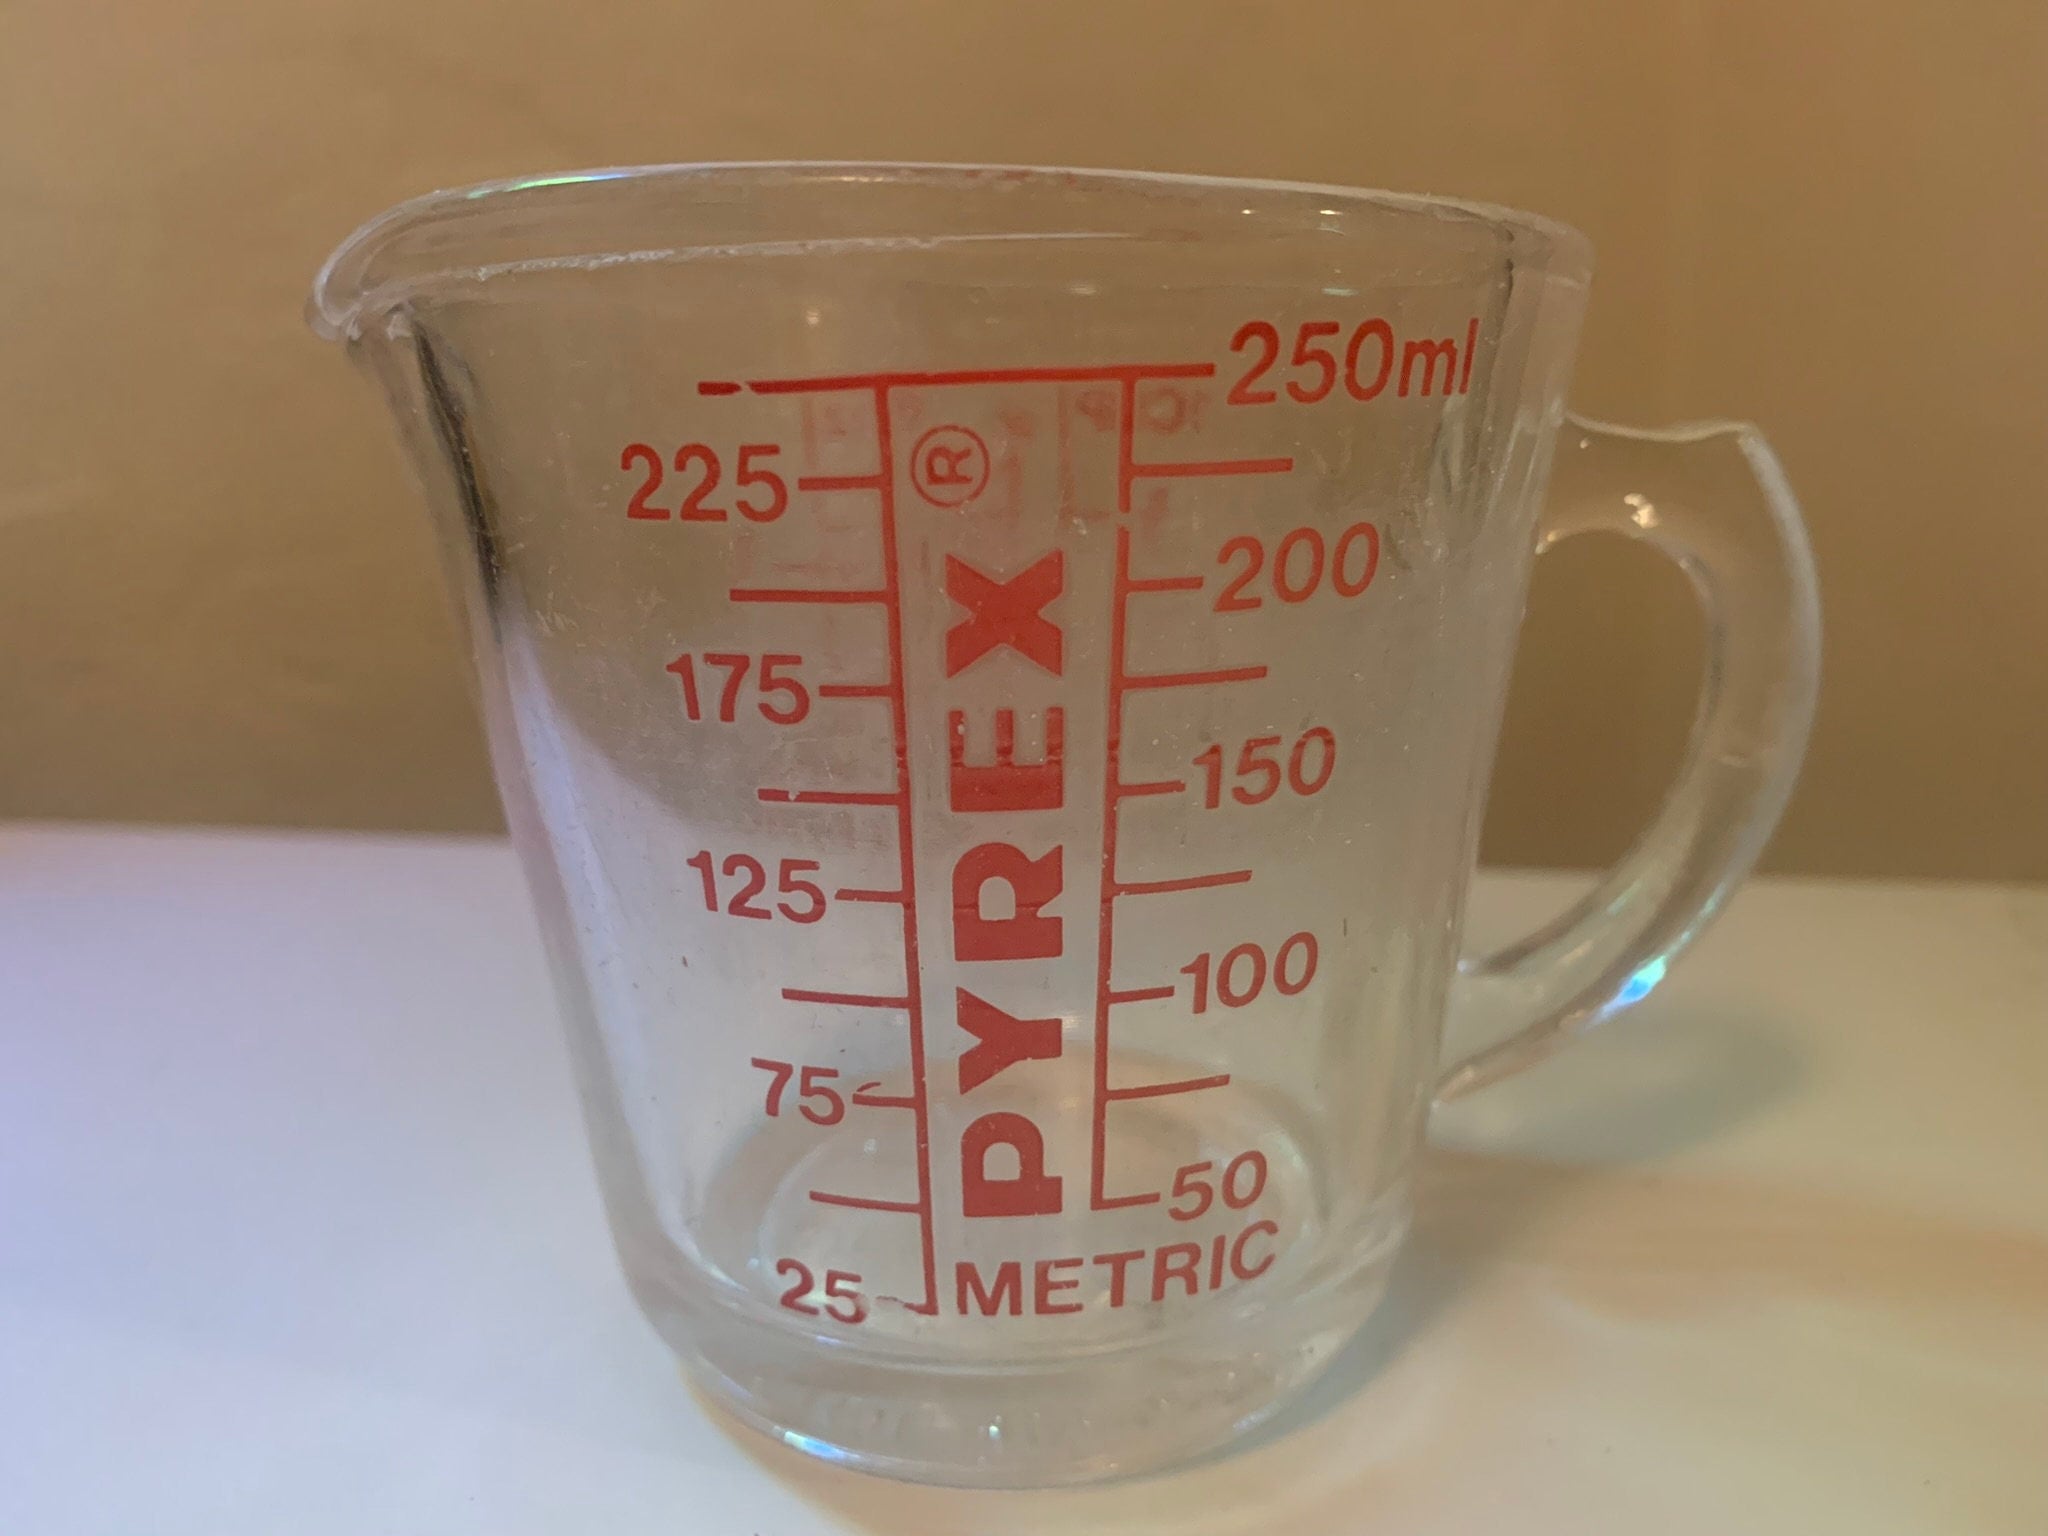 Pyrex Red Letter Open Handle 2-Cup 16 oz Glass Liquid Measuring Cup USA